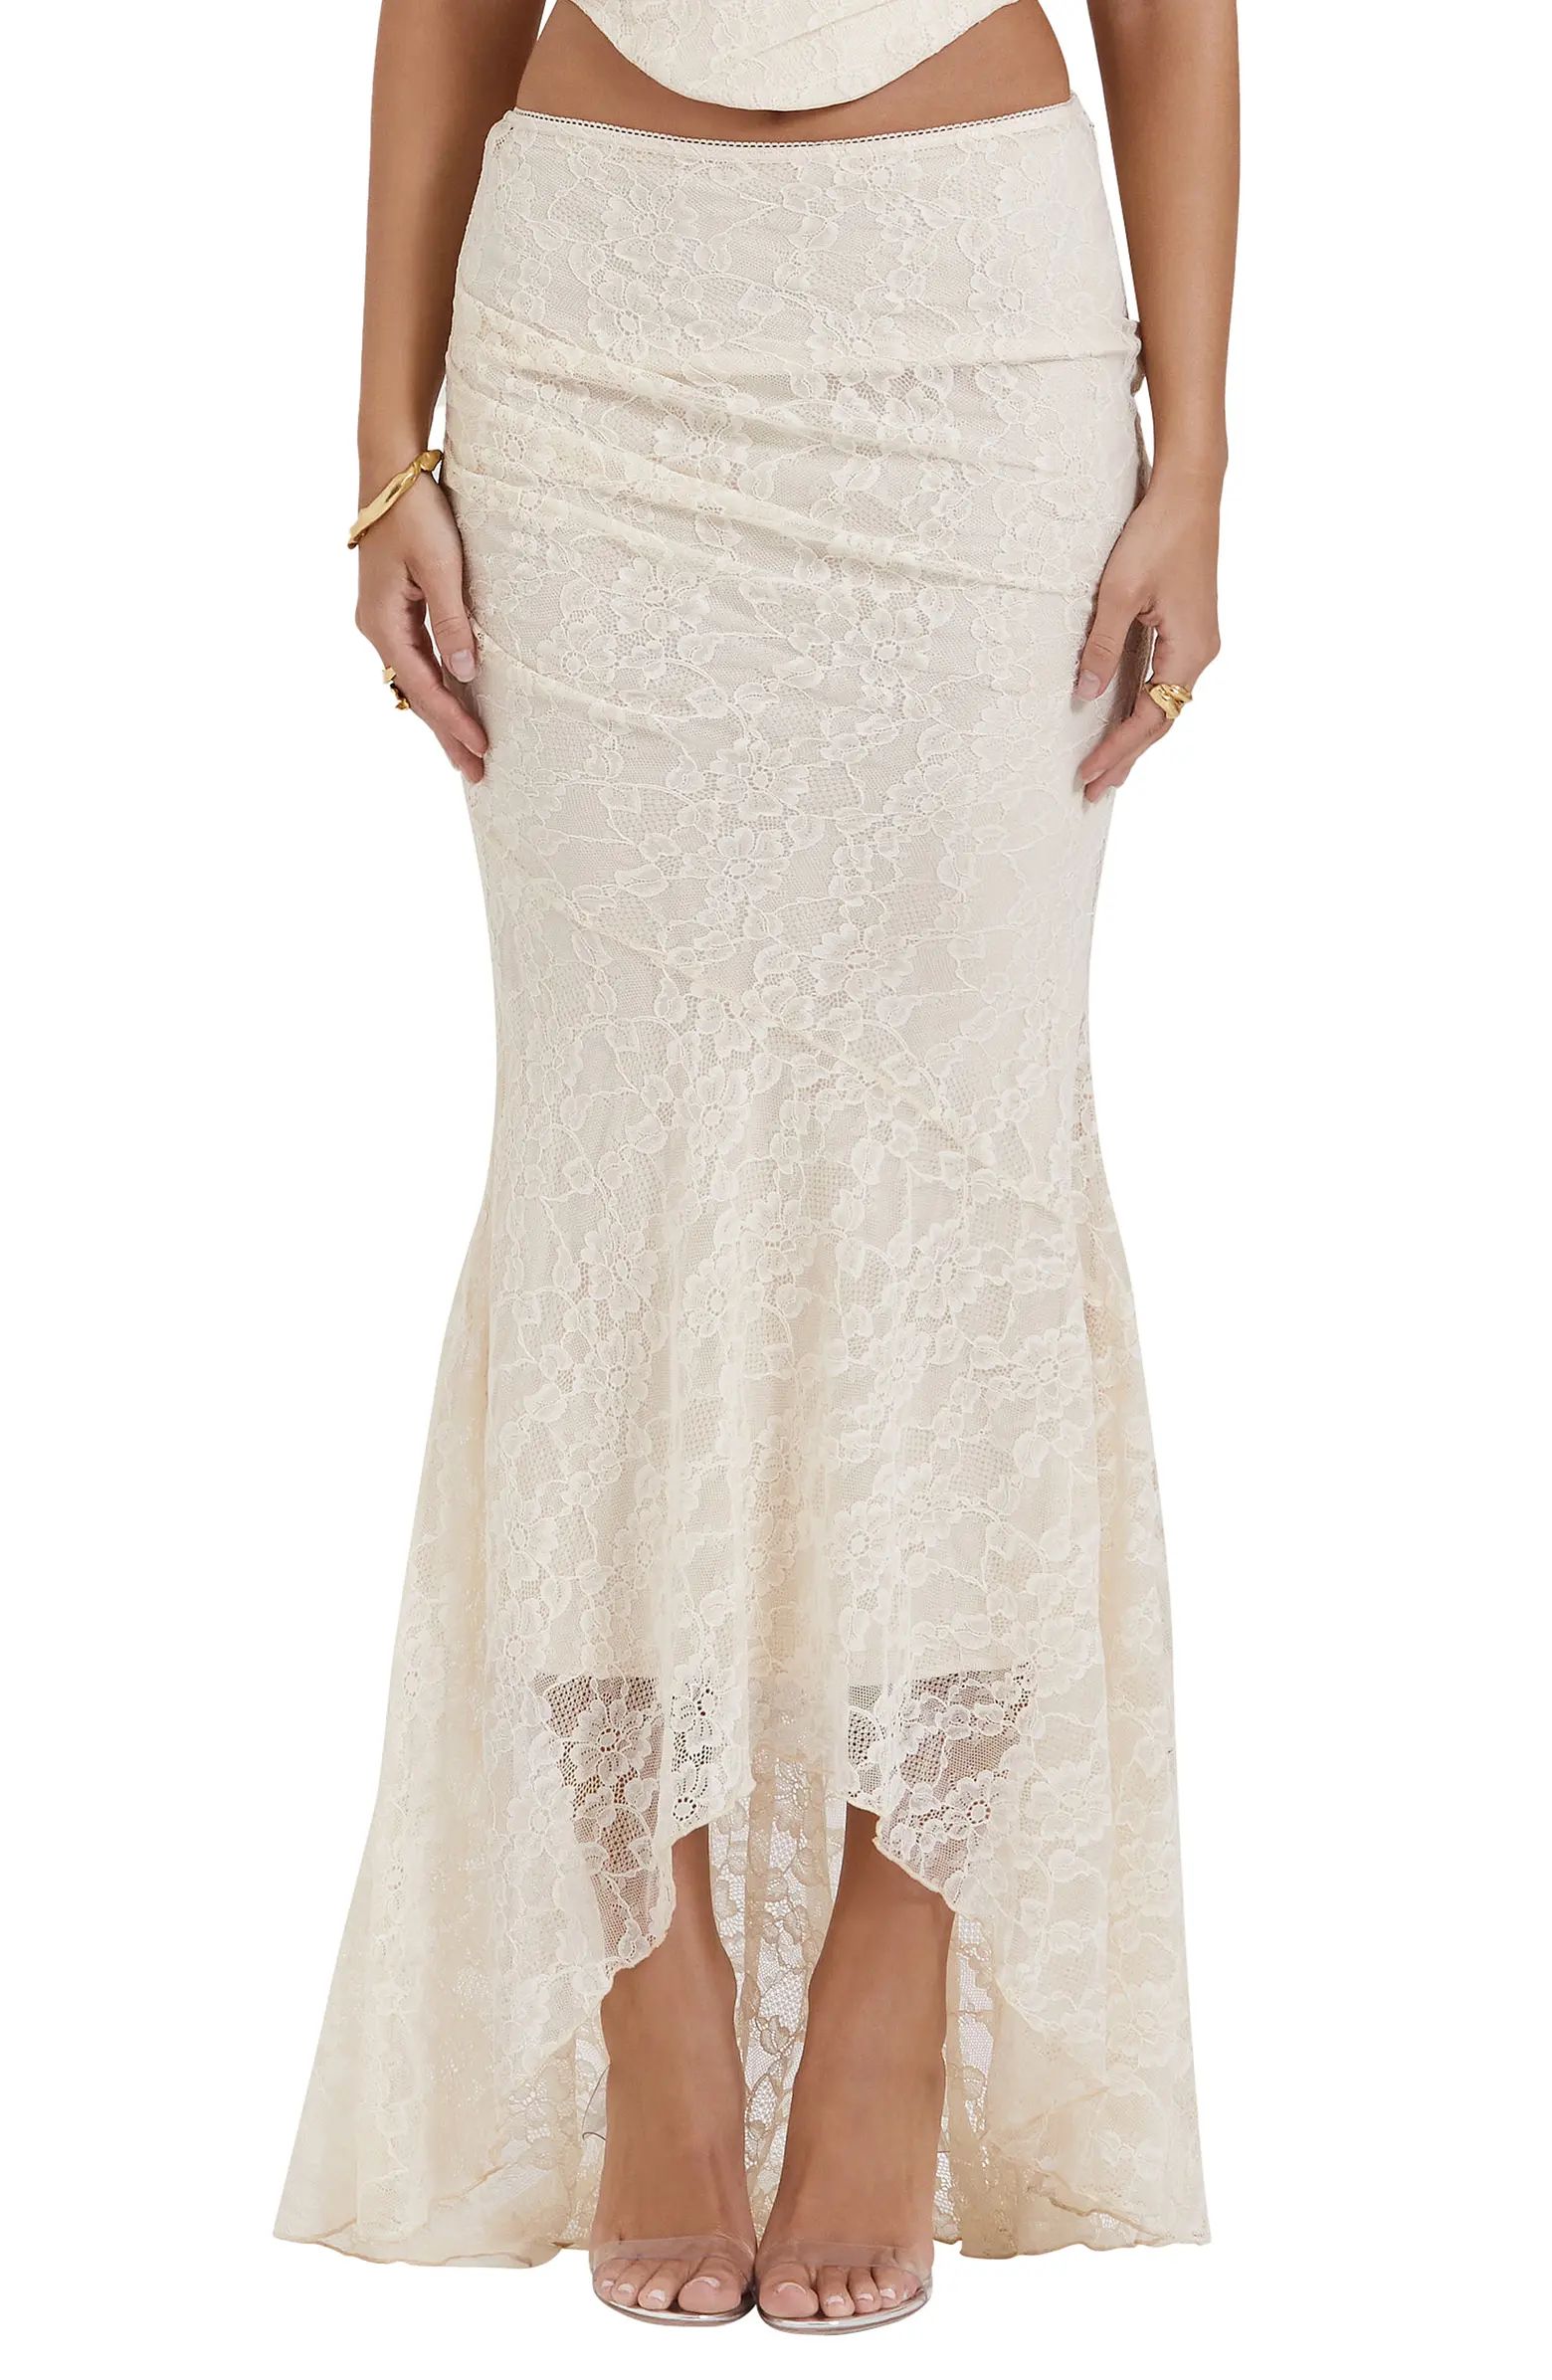 HOUSE OF CB Therese Floral Lace Maxi Skirt | Nordstrom | Nordstrom